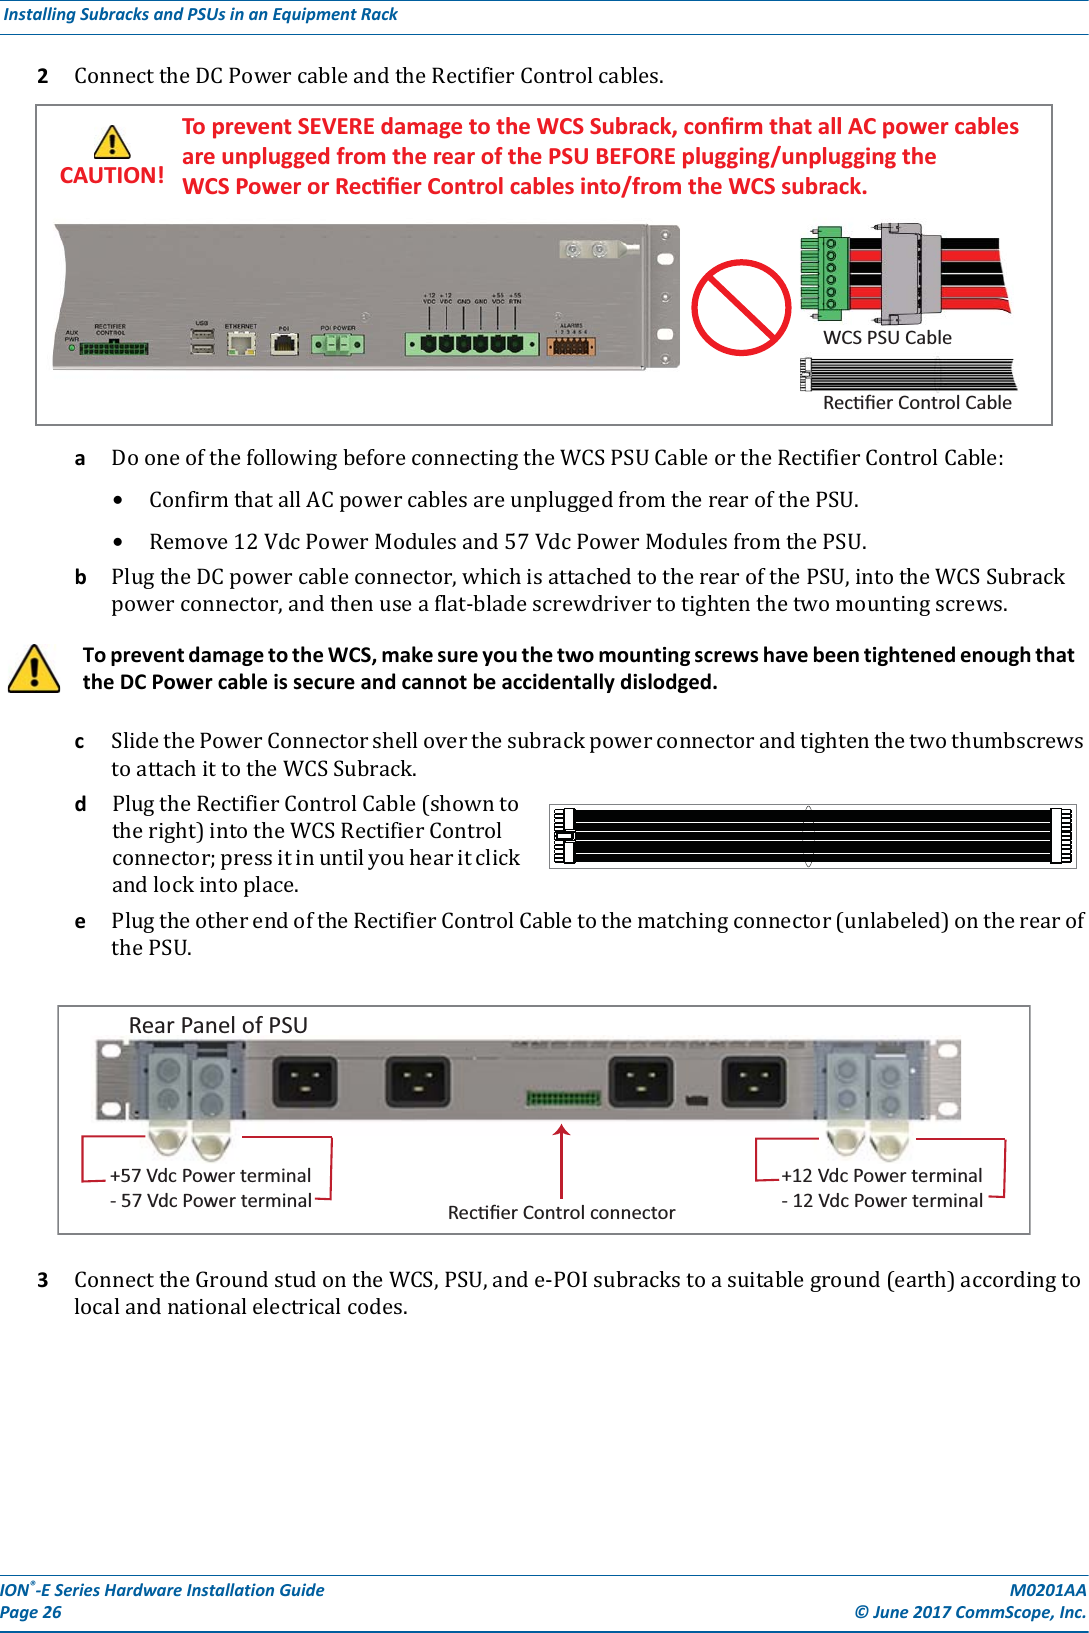 ION®-E Series Hardware Installation Guide M0201AA Page 26 © June 2017 CommScope, Inc. Installing Subracks and PSUs in an Equipment Rack  2ConnecttheDCPowercableandtheRectifierControlcables.aDooneofthefollowingbeforeconnectingtheWCSPSUCableortheRectifierControlCable:•ConfirmthatallACpowercablesareunpluggedfromtherearofthePSU.•Remove12VdcPowerModulesand57VdcPowerModulesfromthePSU.bPlugtheDCpowercableconnector,whichisattachedtotherearofthePSU,intotheWCSSubrackpowerconnector,andthenuseaflat-bladescrewdrivertotightenthetwomountingscrews.cSlidethePowerConnectorshelloverthesubrackpowerconnectorandtightenthetwothumbscrewstoattachittotheWCSSubrack.dPlugtheRectifierControlCable(showntotheright)intotheWCSRectifierControlconnector;pressitinuntilyouhearitclickandlockintoplace.ePlugtheotherendoftheRectifierControlCabletothematchingconnector(unlabeled)ontherearofthePSU.3ConnecttheGroundstudontheWCS,PSU,ande-POIsubrackstoasuitableground(earth)accordingtolocalandnationalelectricalcodes.To prevent damage to the WCS, make sure you the two mounting screws have been tightened enough that the DC Power cable is secure and cannot be accidentally dislodged.WCS PSU CableRecﬁer Control CableTo prevent SEVERE damage to the WCS Subrack, conﬁrm that all AC power cables are unplugged from the rear of the PSU BEFORE plugging/unplugging the WCS Power or Recﬁer Control cables into/from the WCS subrack.CAUTION!Rear Panel of PSU+57 Vdc Power terminal- 57 Vdc Power terminal Recﬁer Control connector+12 Vdc Power terminal- 12 Vdc Power terminal